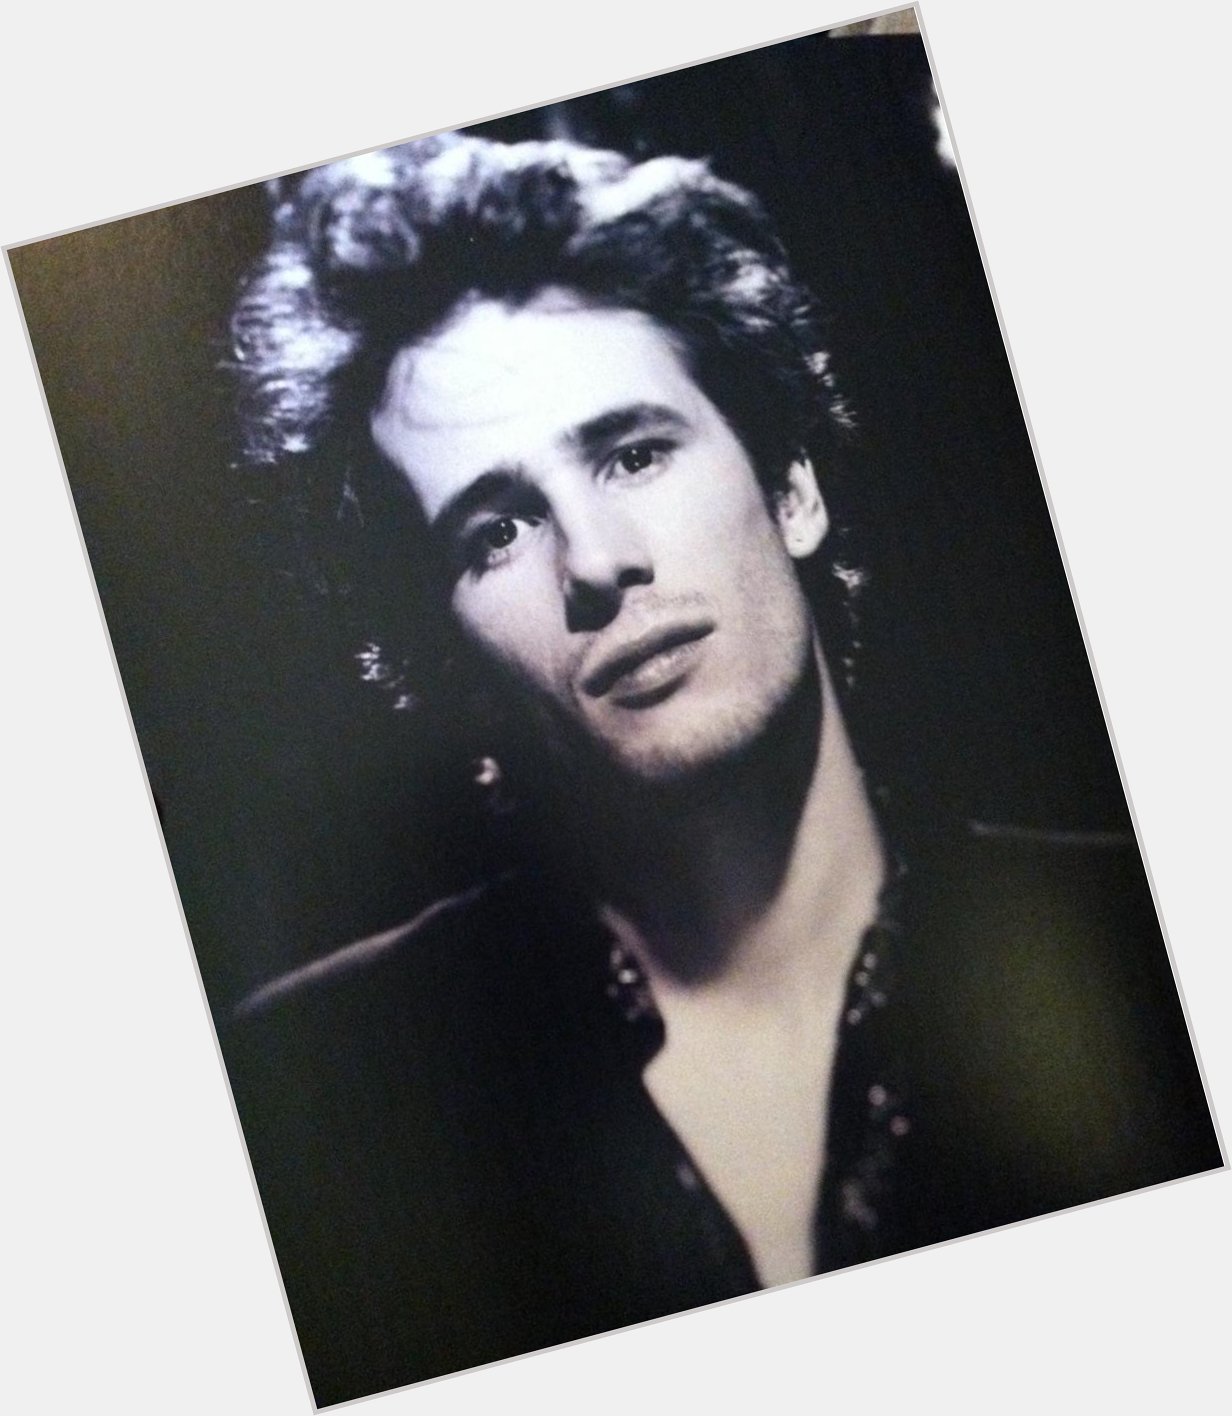 "Crown my fear your king at the point of a gun. All I want to do is love everyone.." Happy birthday Jeff Buckley 